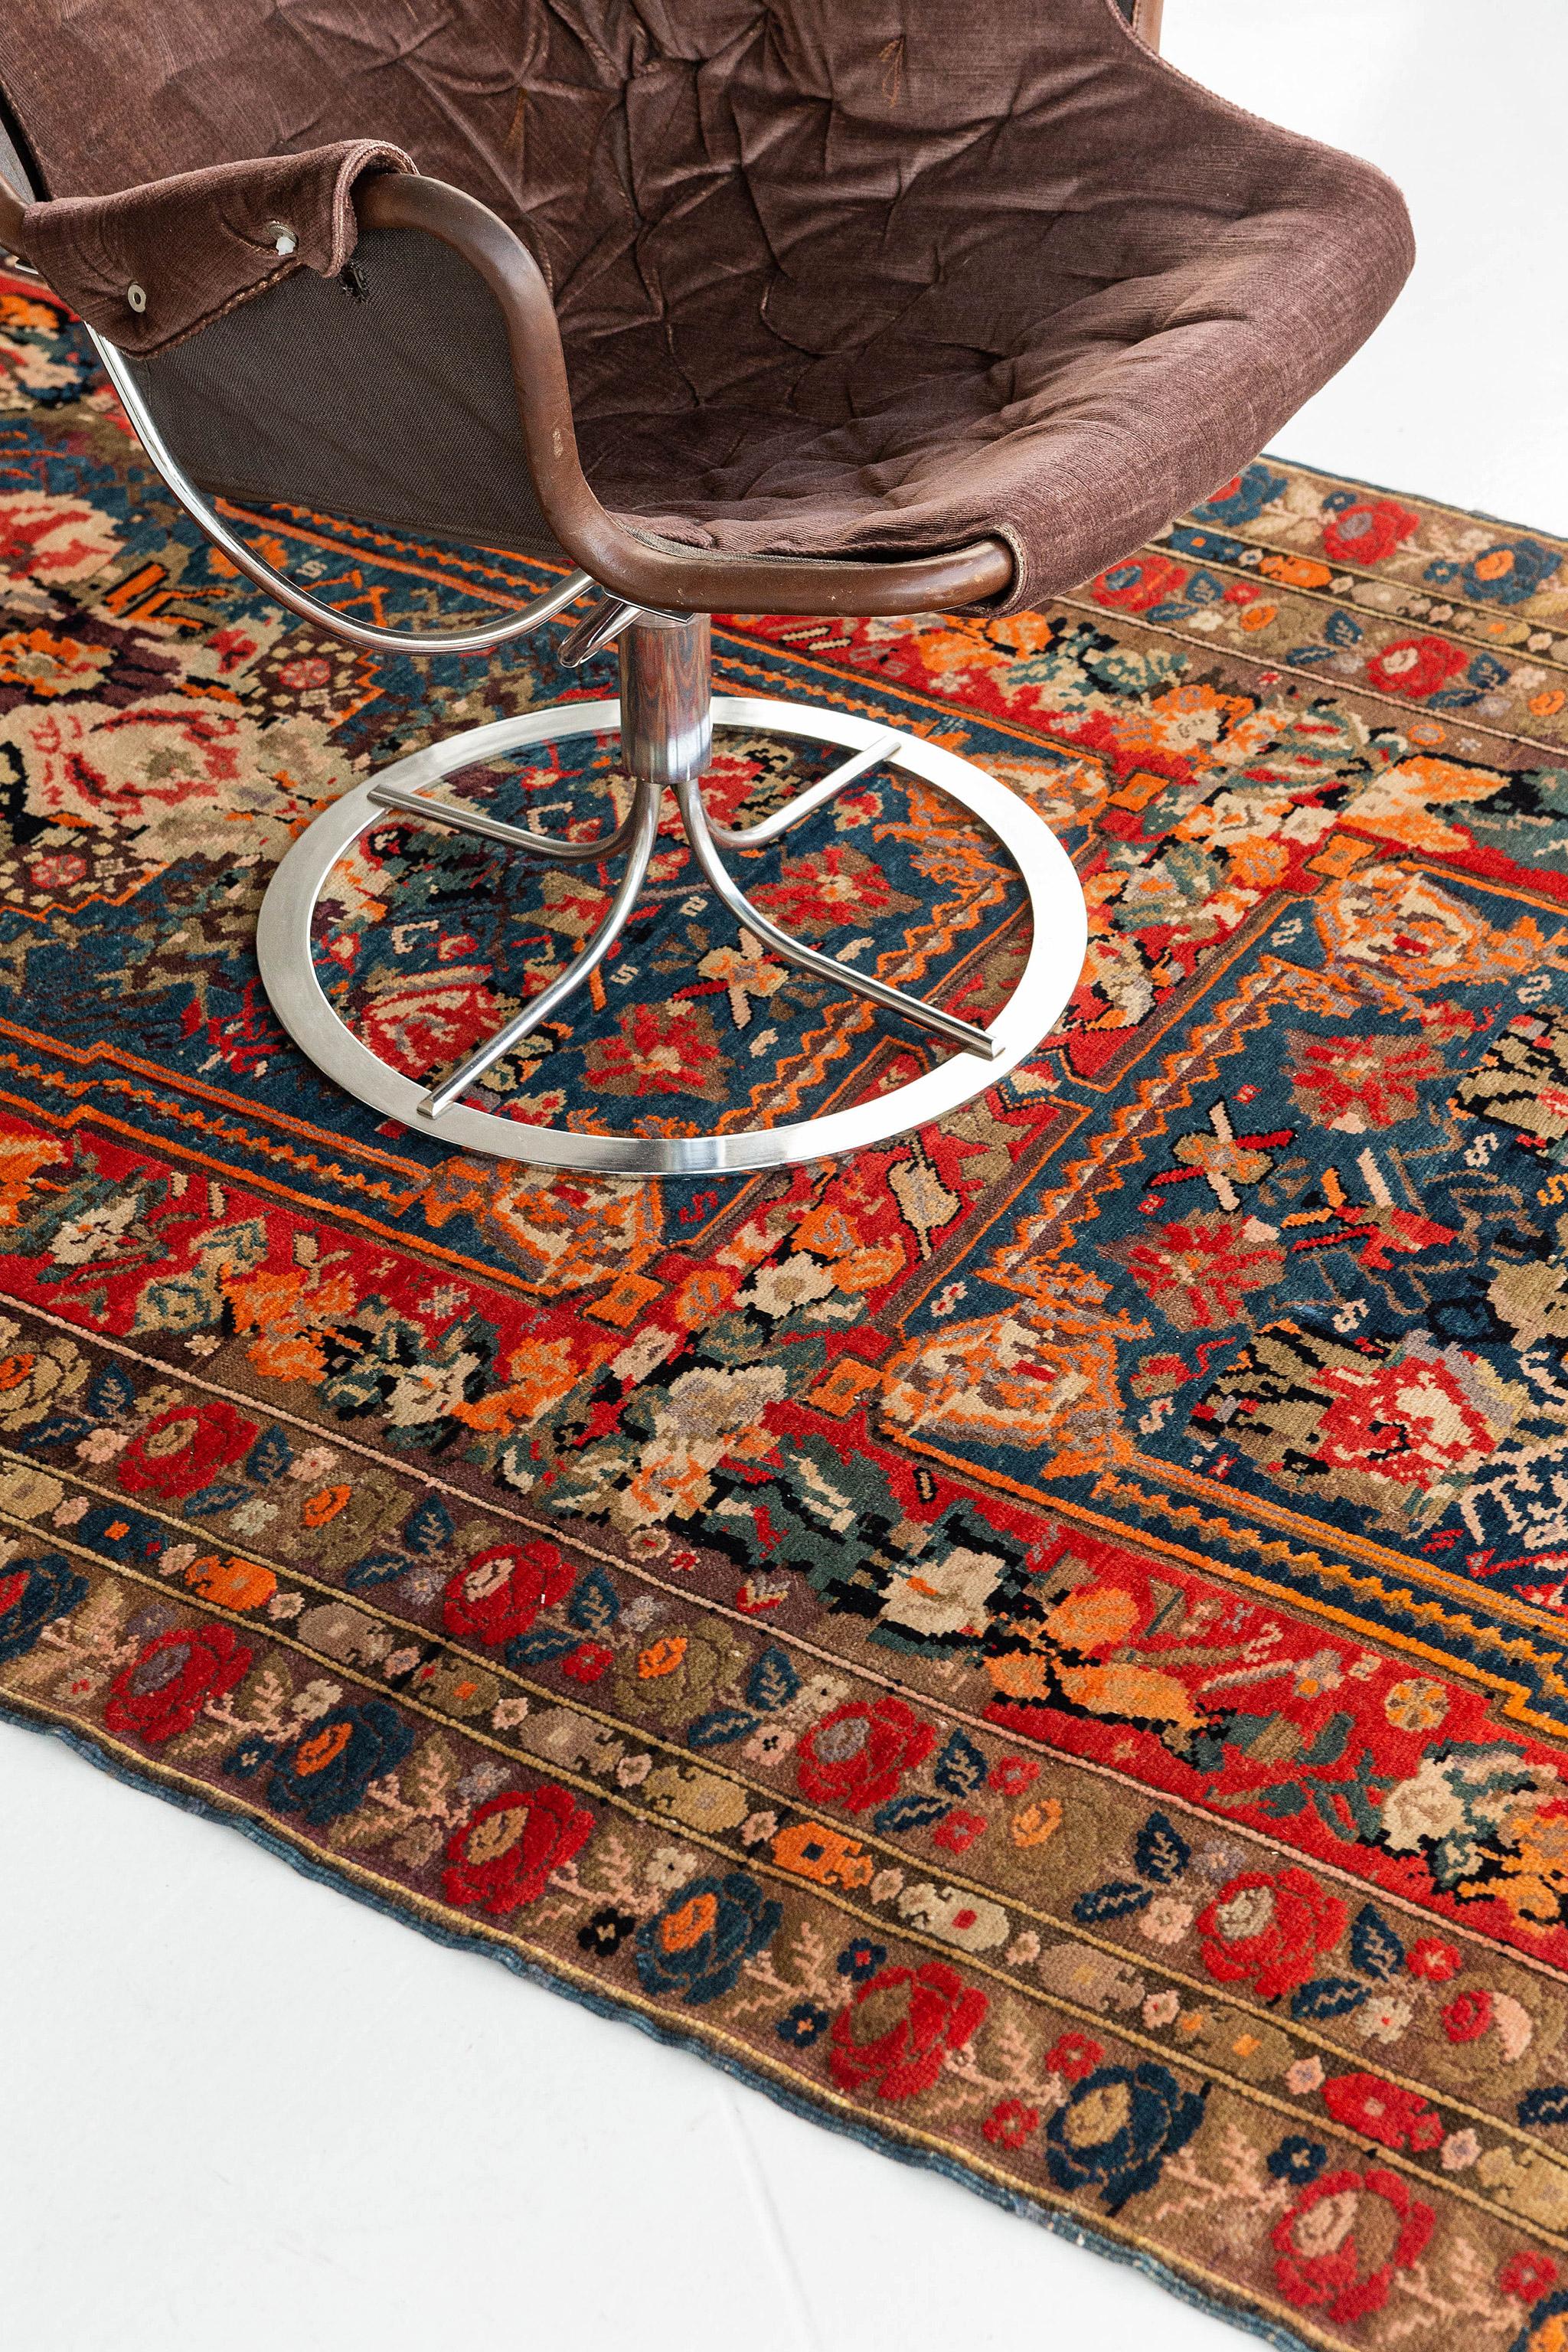 This multi-colored hallway Persian runner rug hails from Karabakh, a region in Eastern Armenia. Ideally suited for hallways, this piece can also be layered to create a stylish look. In addition to Persian rugs, we sell a large array of modern and